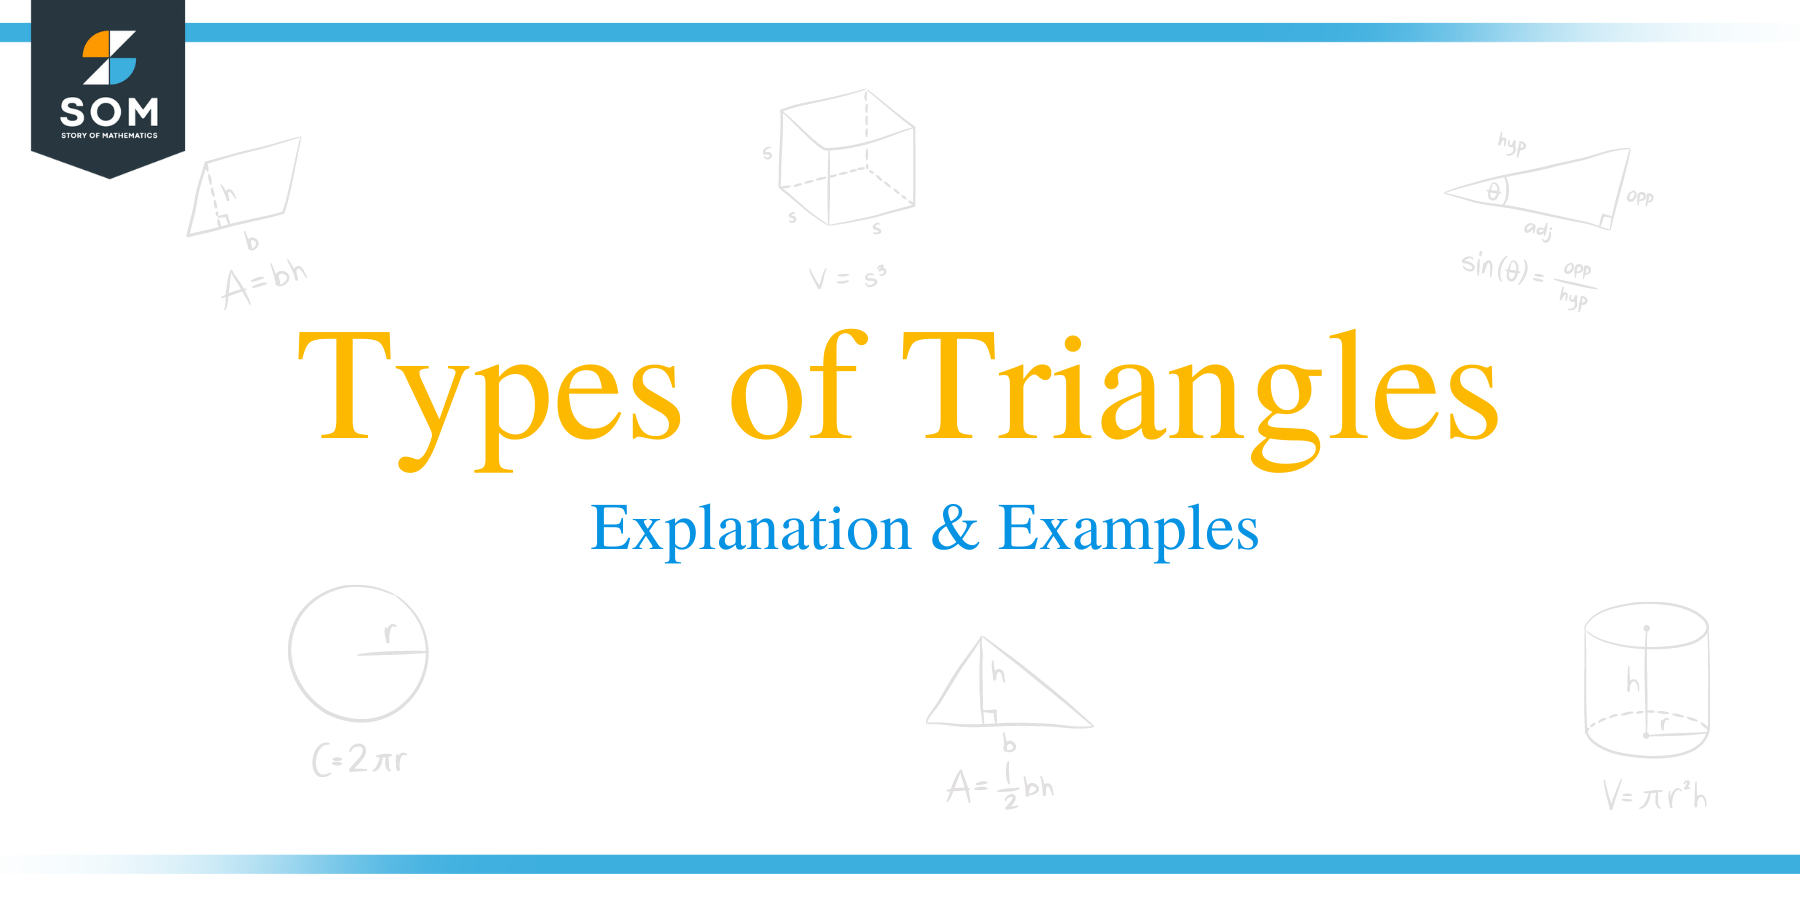 Types of triangles review (article)